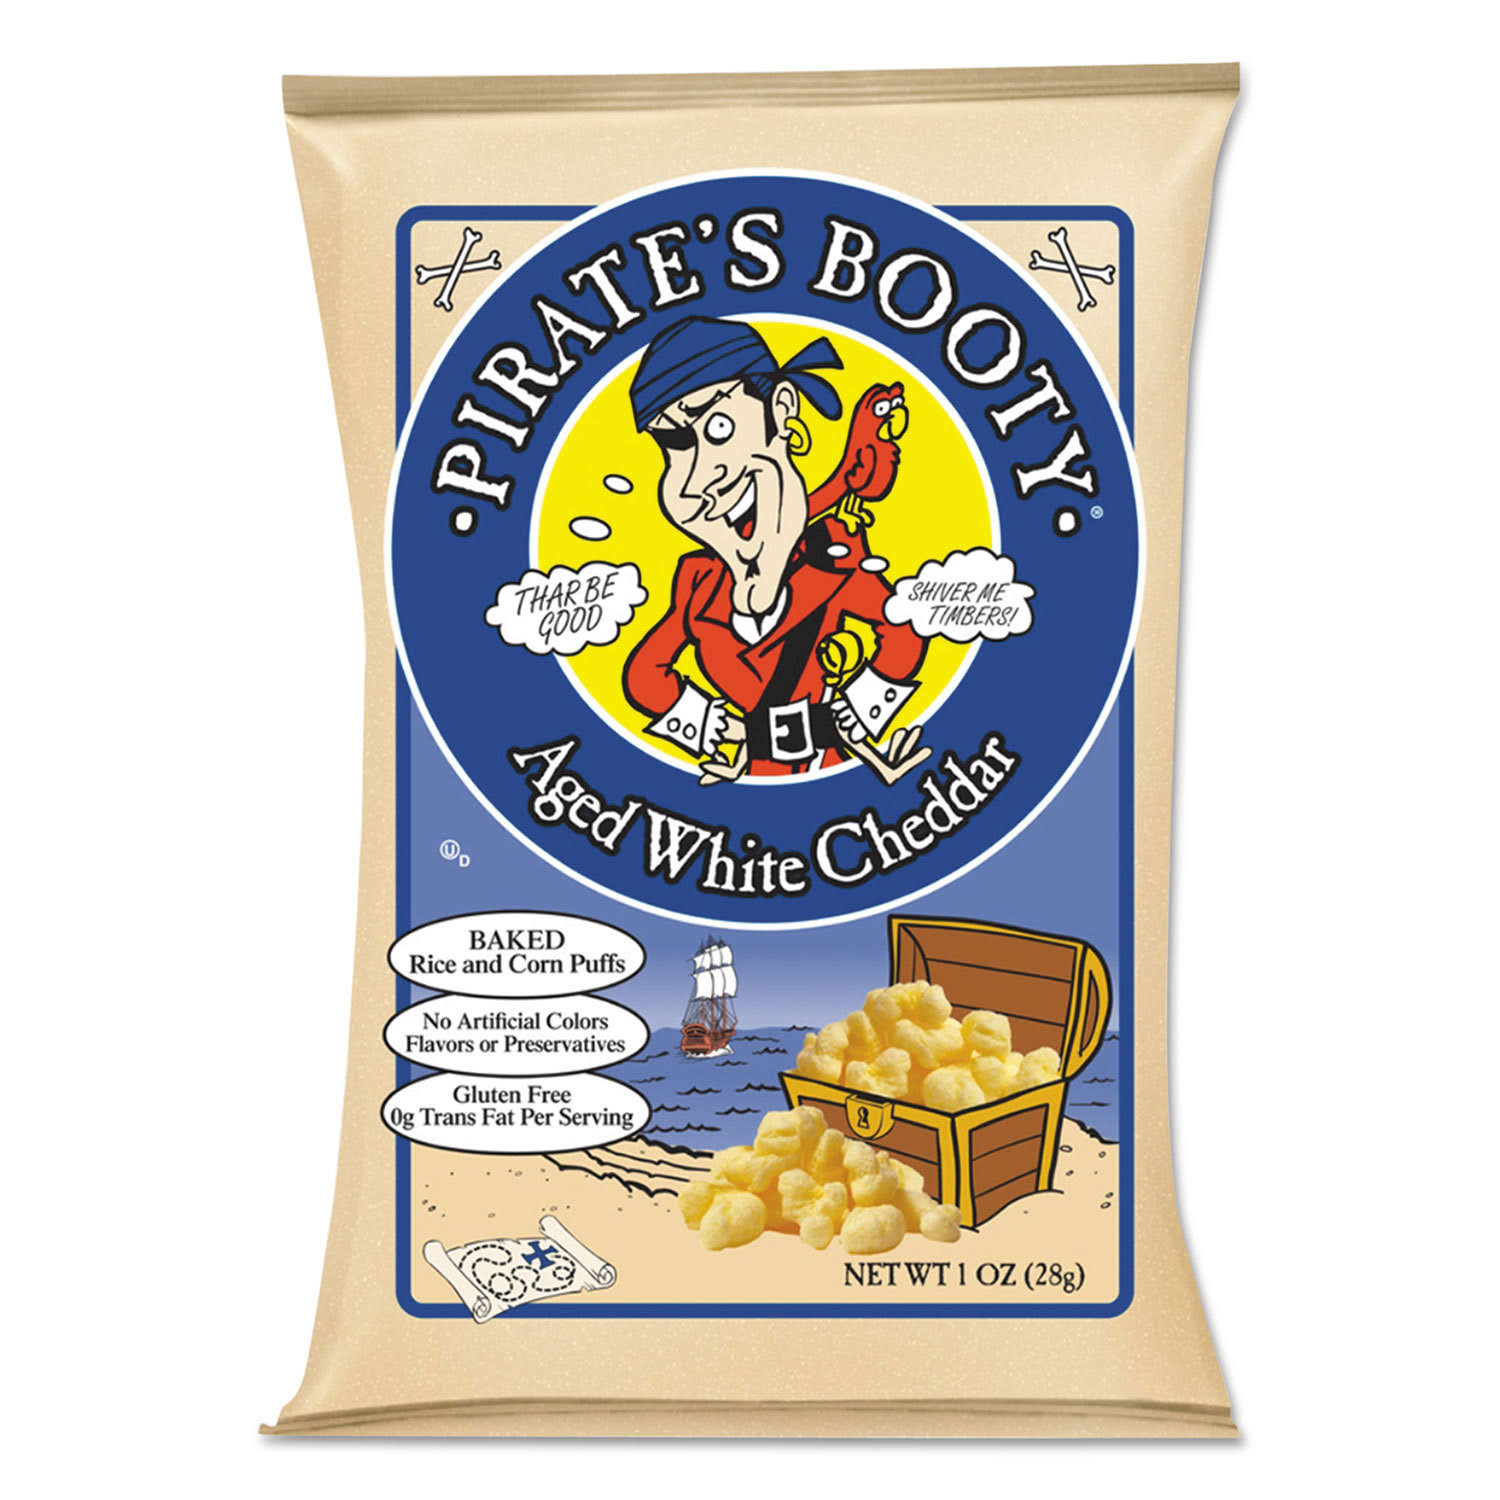 Pirate's Booty Baked Rice And Corn Puffs - Aged White Cheddar, 28g